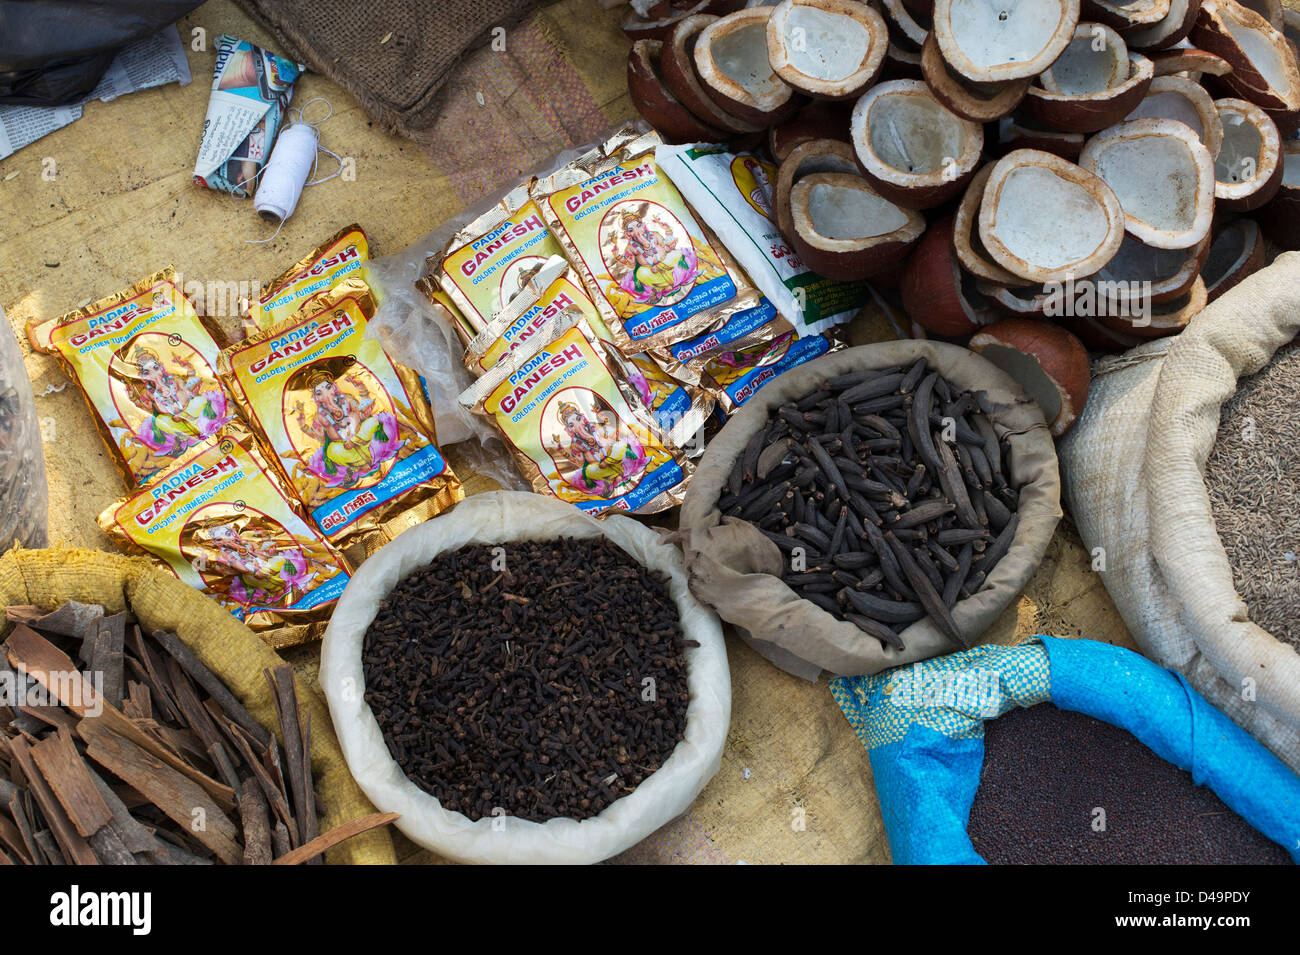 Indian street market with sacks of Indian spices and dried produce. India Stock Photo